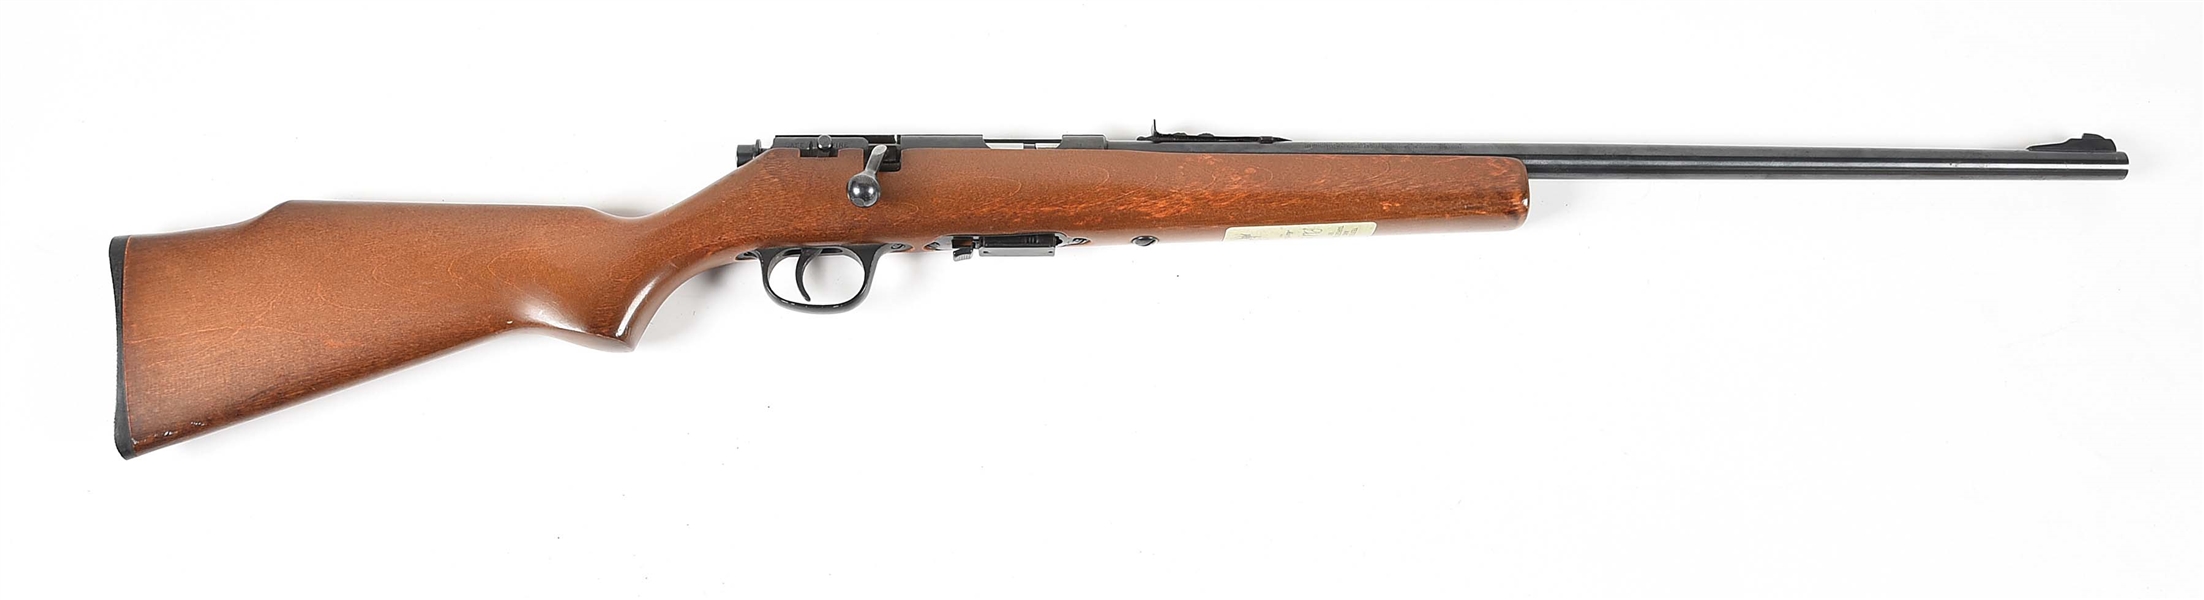 (M) MARLIN ARMS CO. MODEL 25MN BOLT ACTION RIFLE.